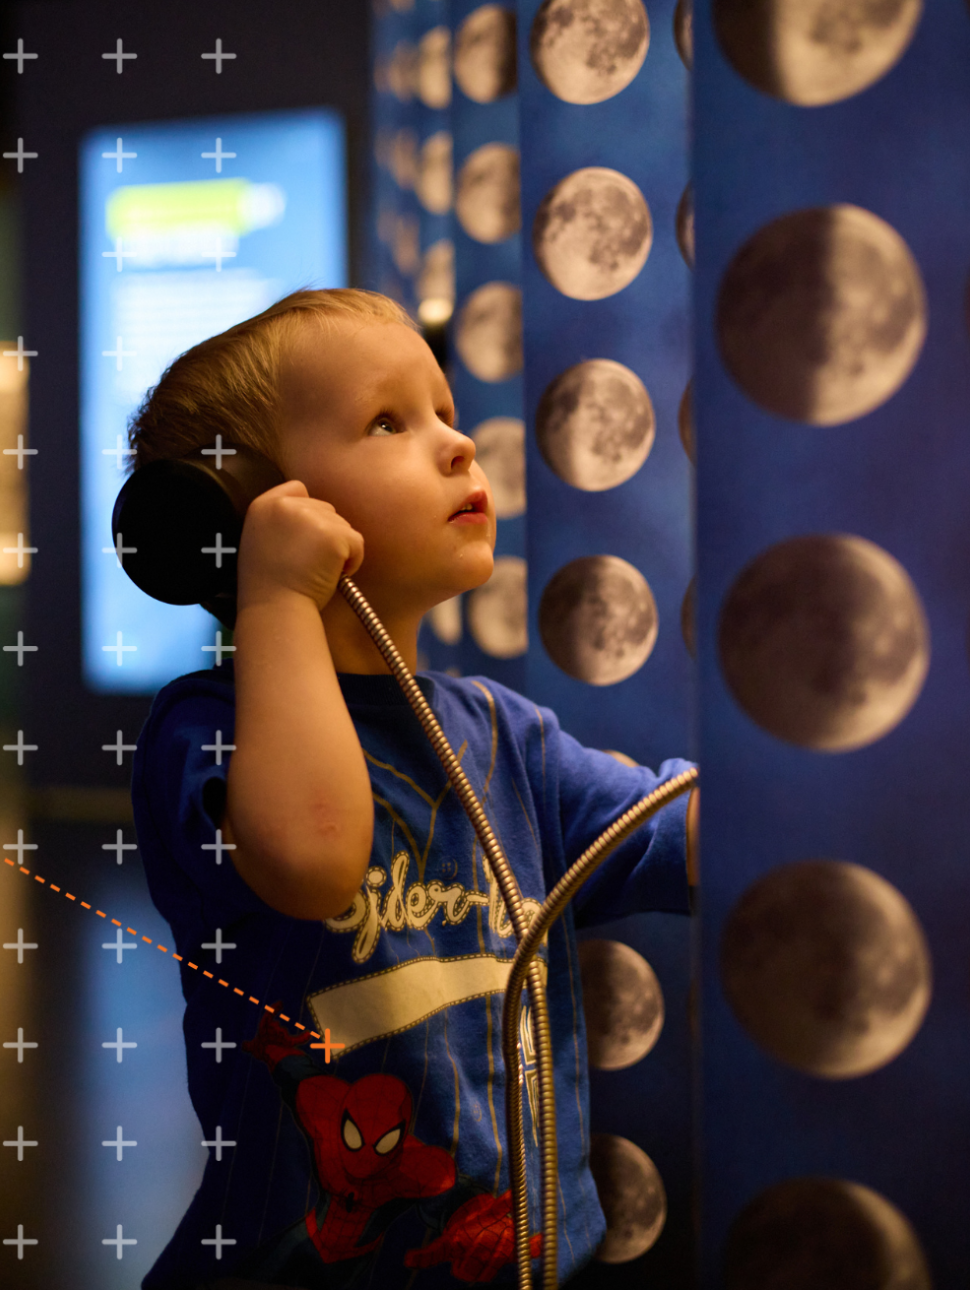  The image shows a young child holding a speaker to his ear with a moon pattern in the background.